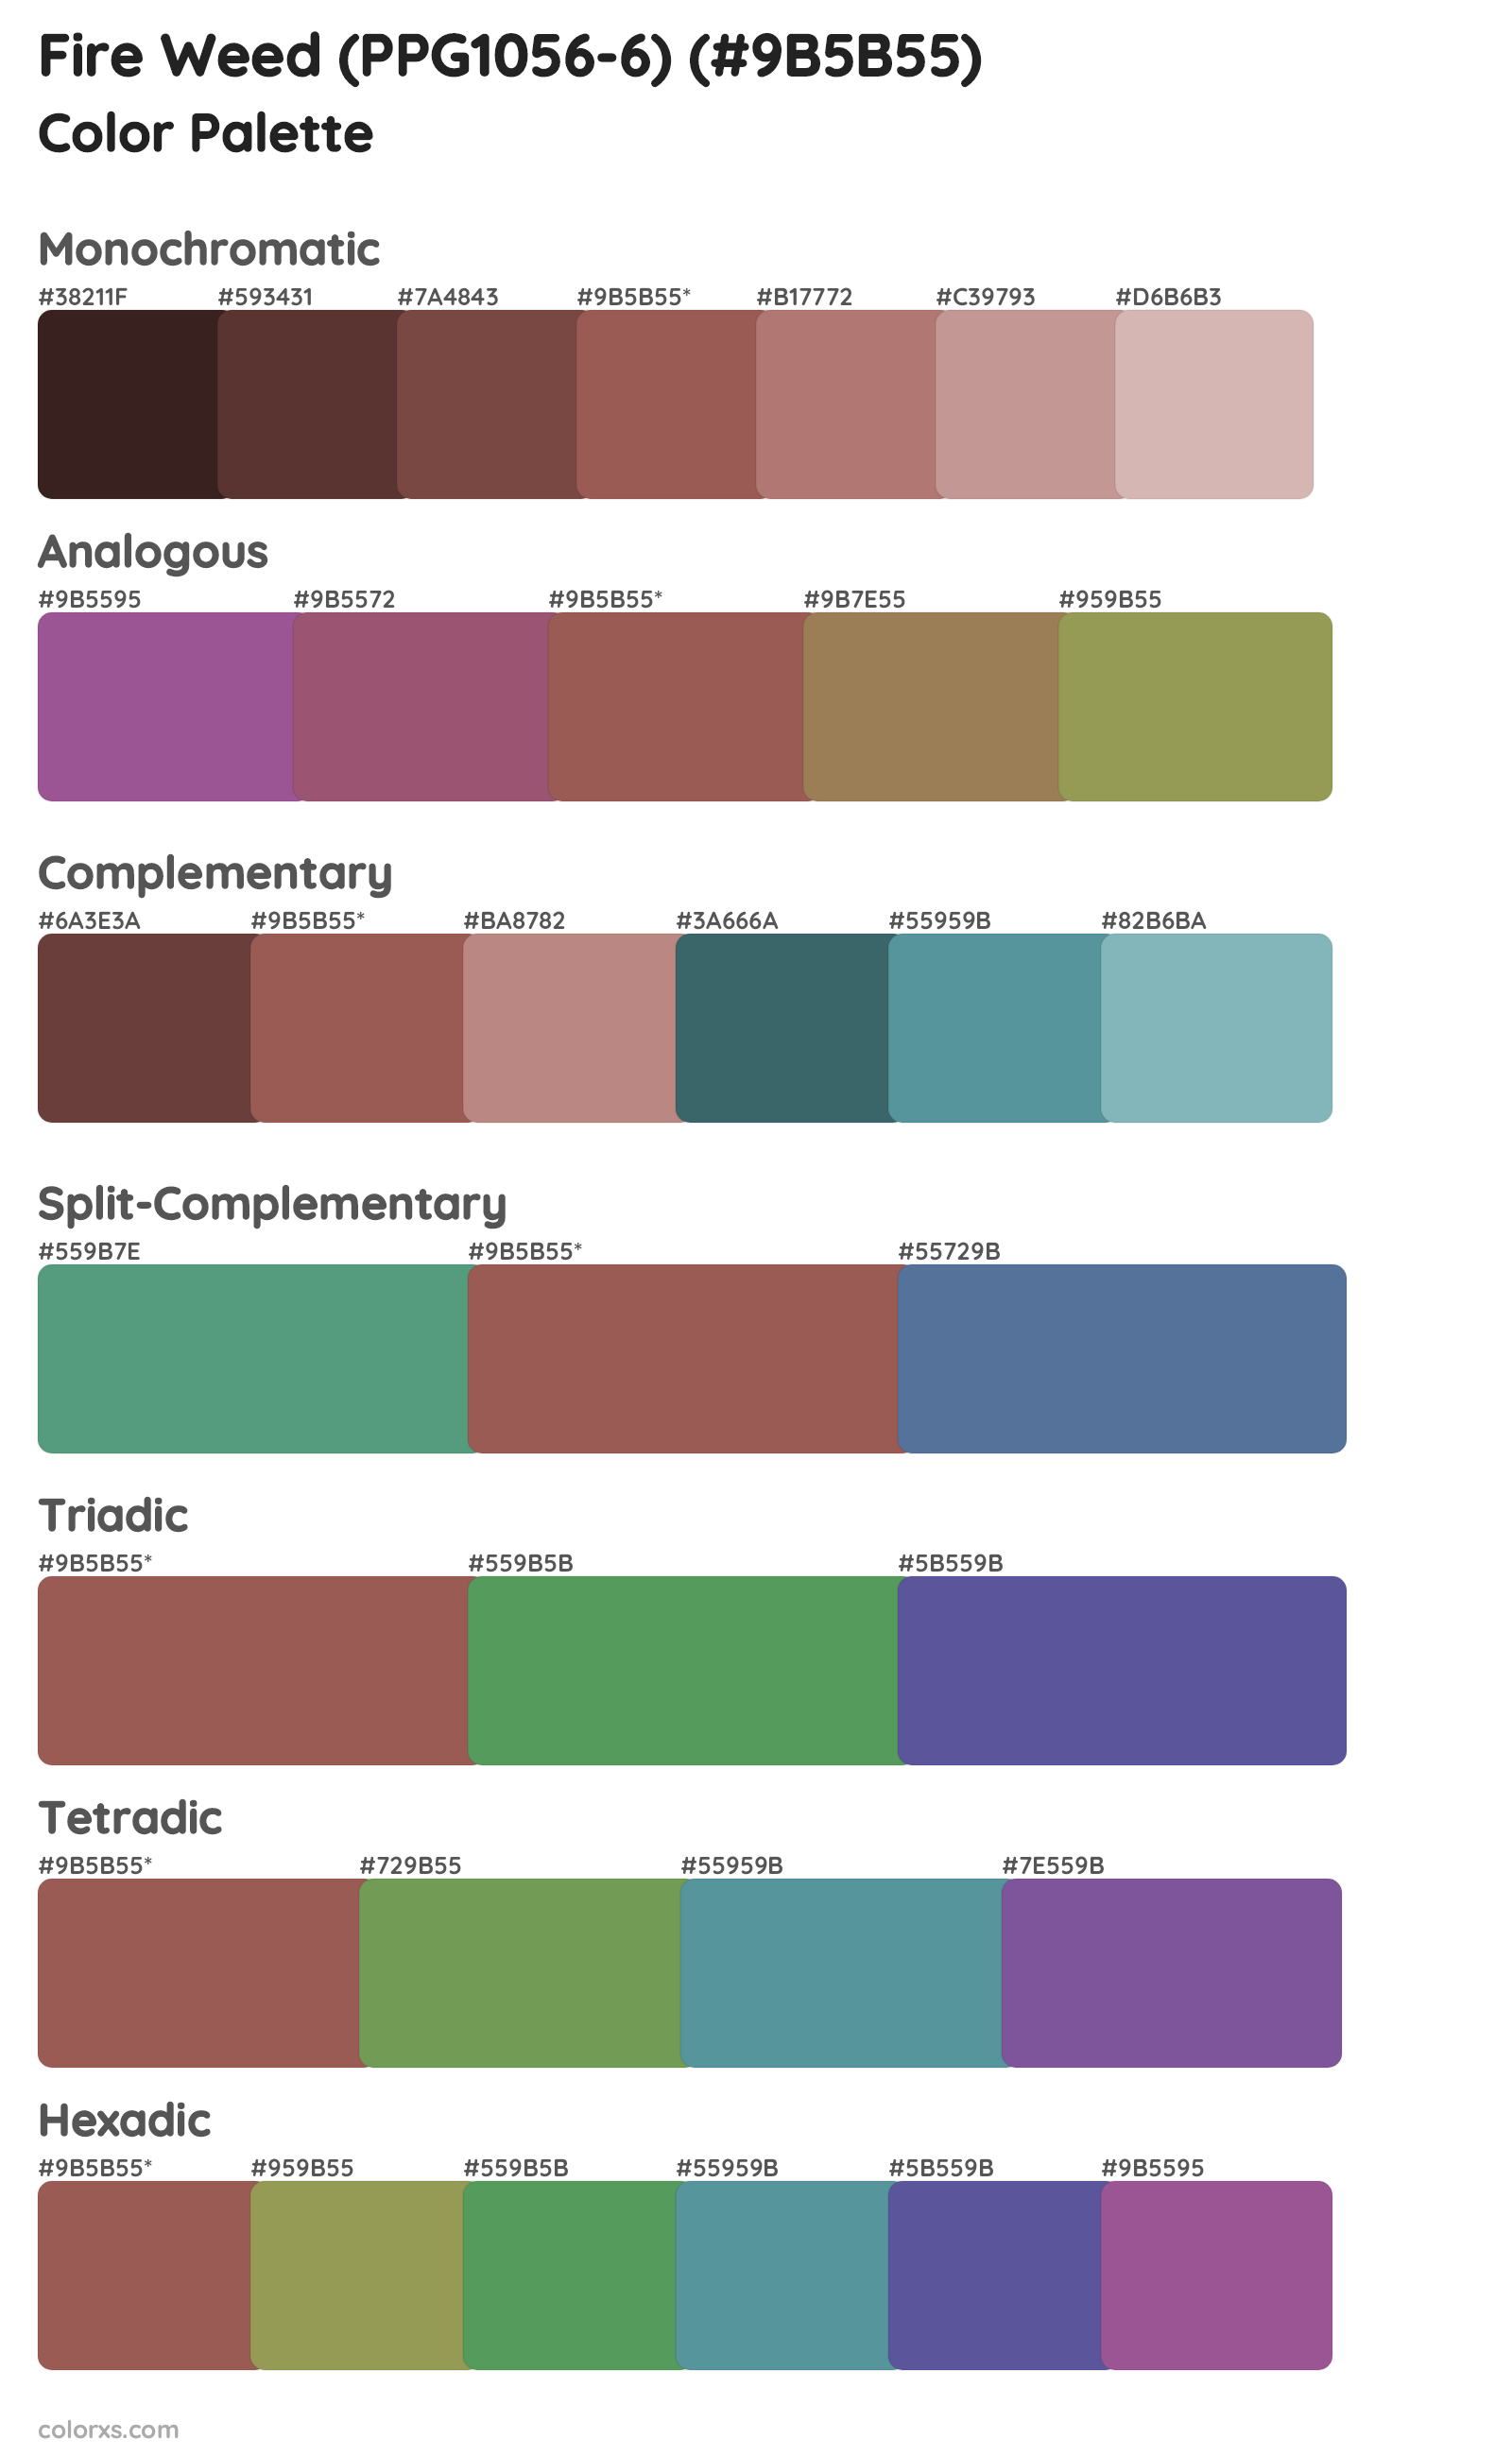 Fire Weed (PPG1056-6) Color Scheme Palettes